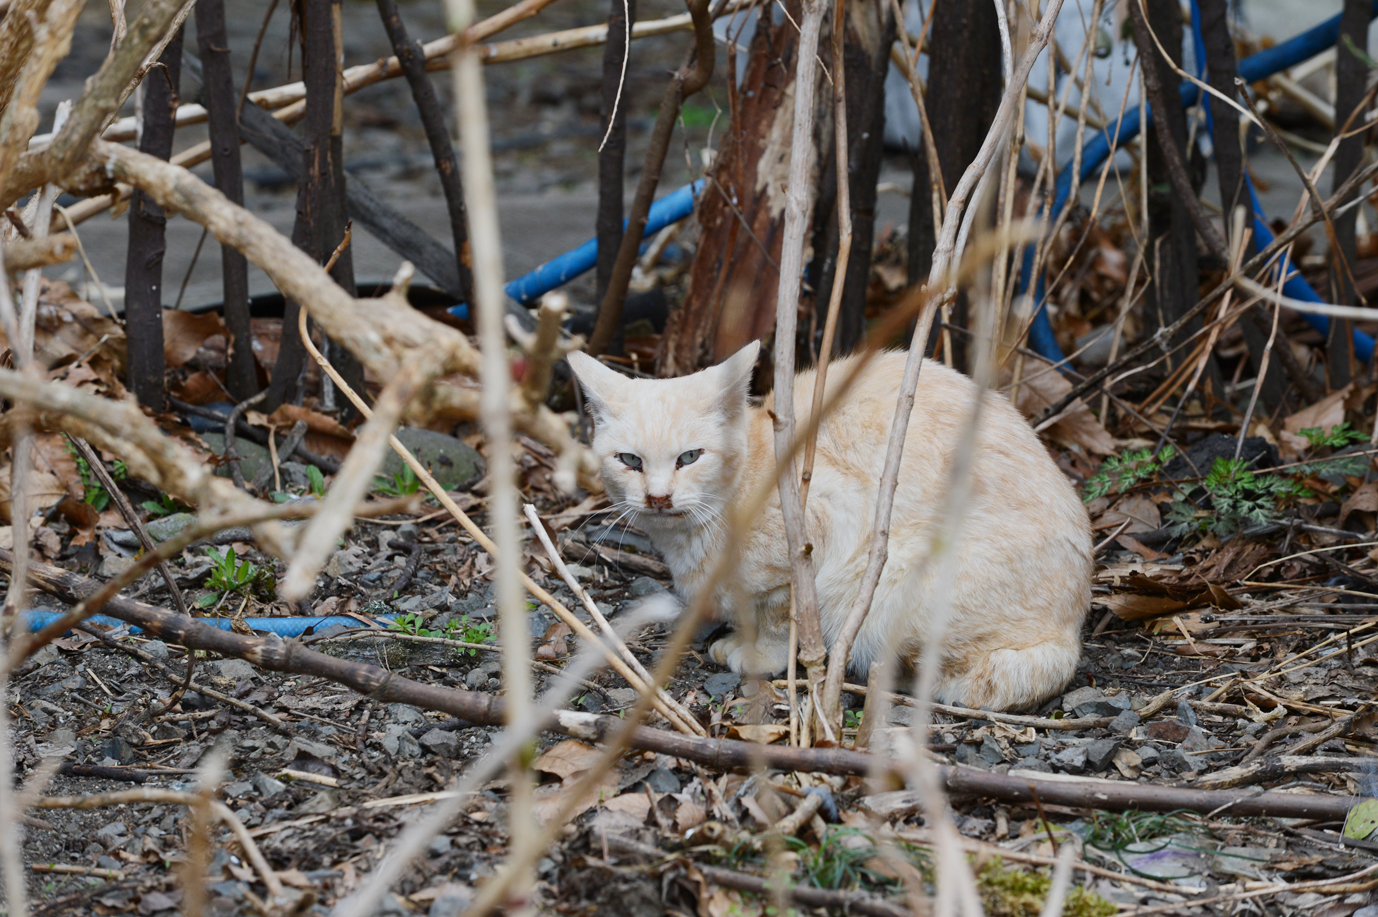 Survival of the fittest: The animals hardy enough to survive the harsh Tohoku winters do what comes naturally and breed, resulting in a sharp rise in feral cats and dogs in Fukushima. | MAKOTO  YAMAMURA